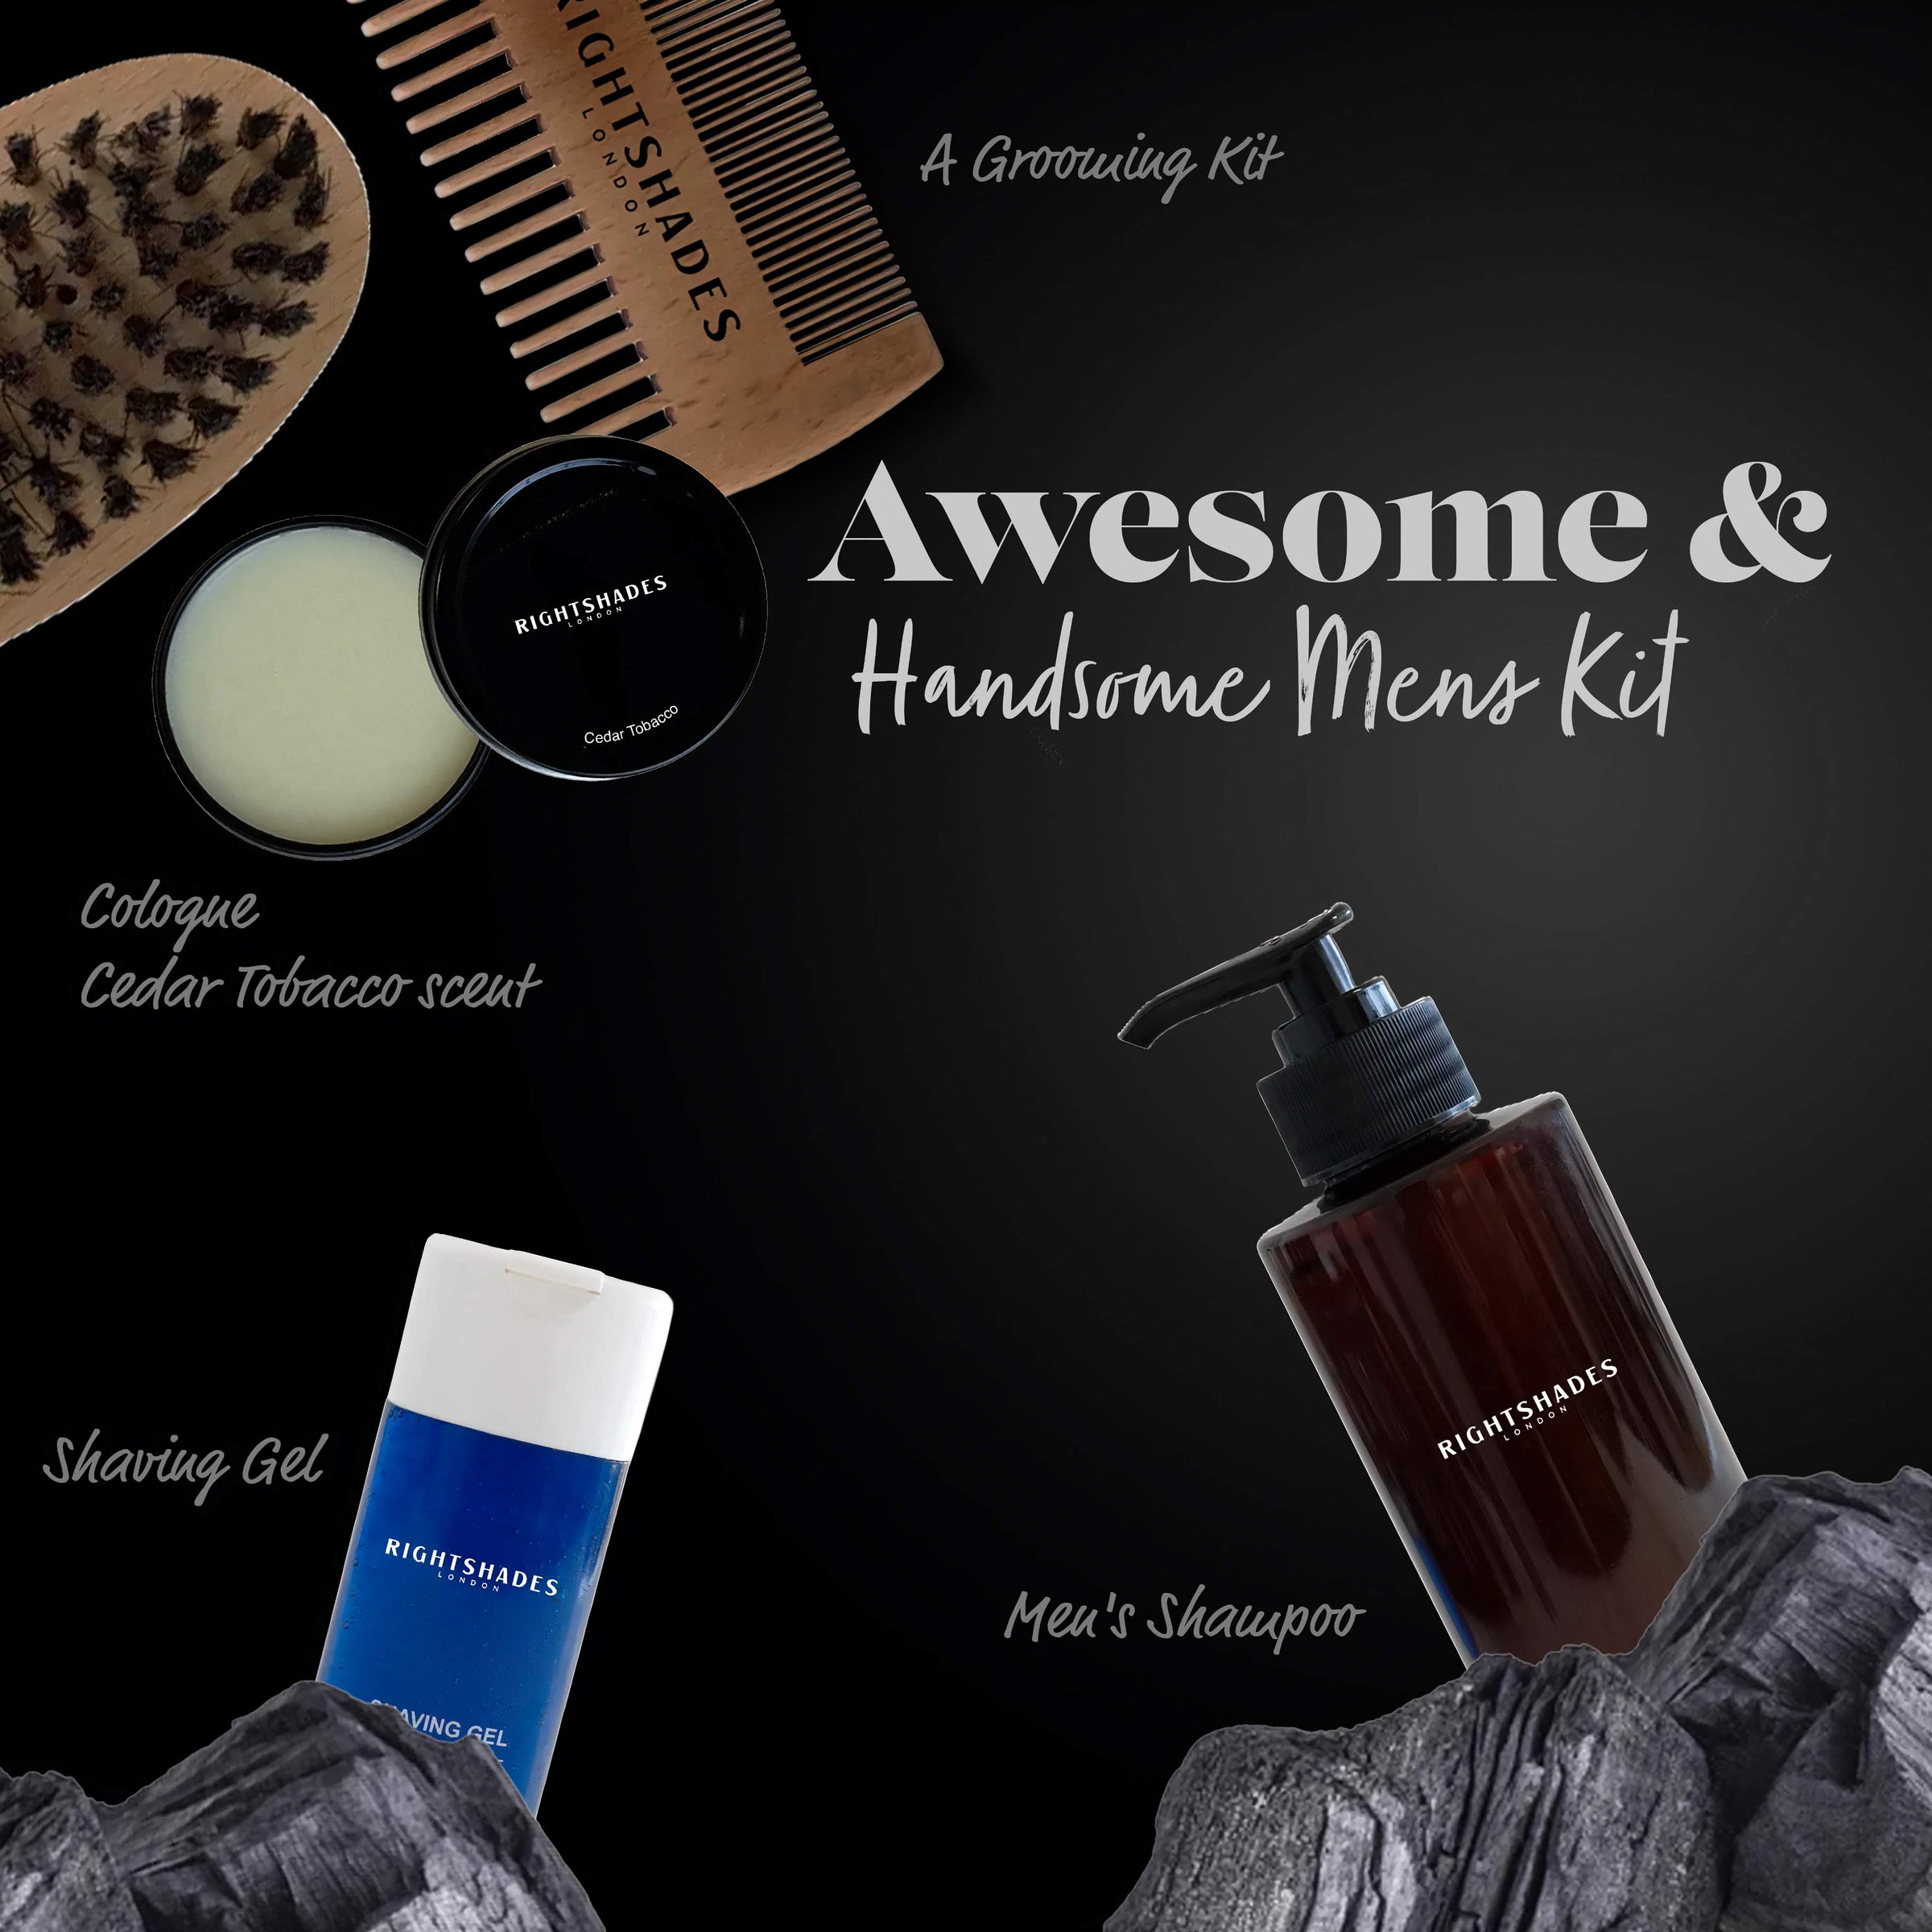 Awesome & Handsome Mens Kit